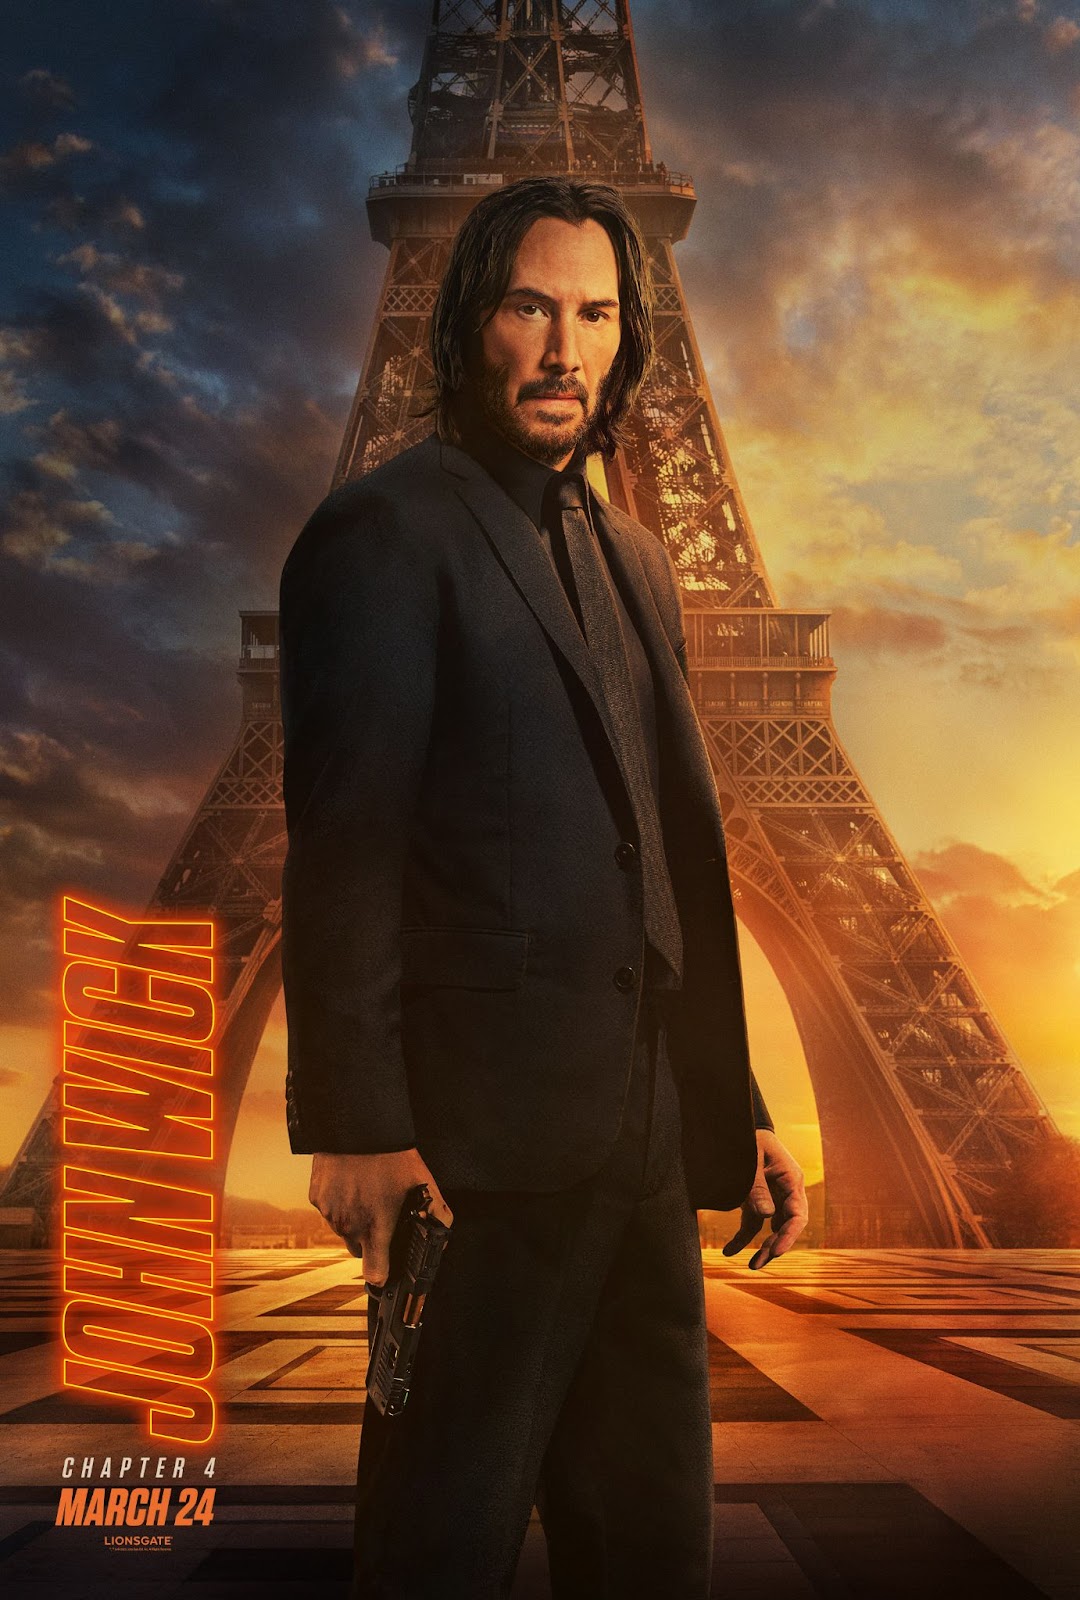 Movie poster from John Wick 4 courtesy of Lionsgate Publicity